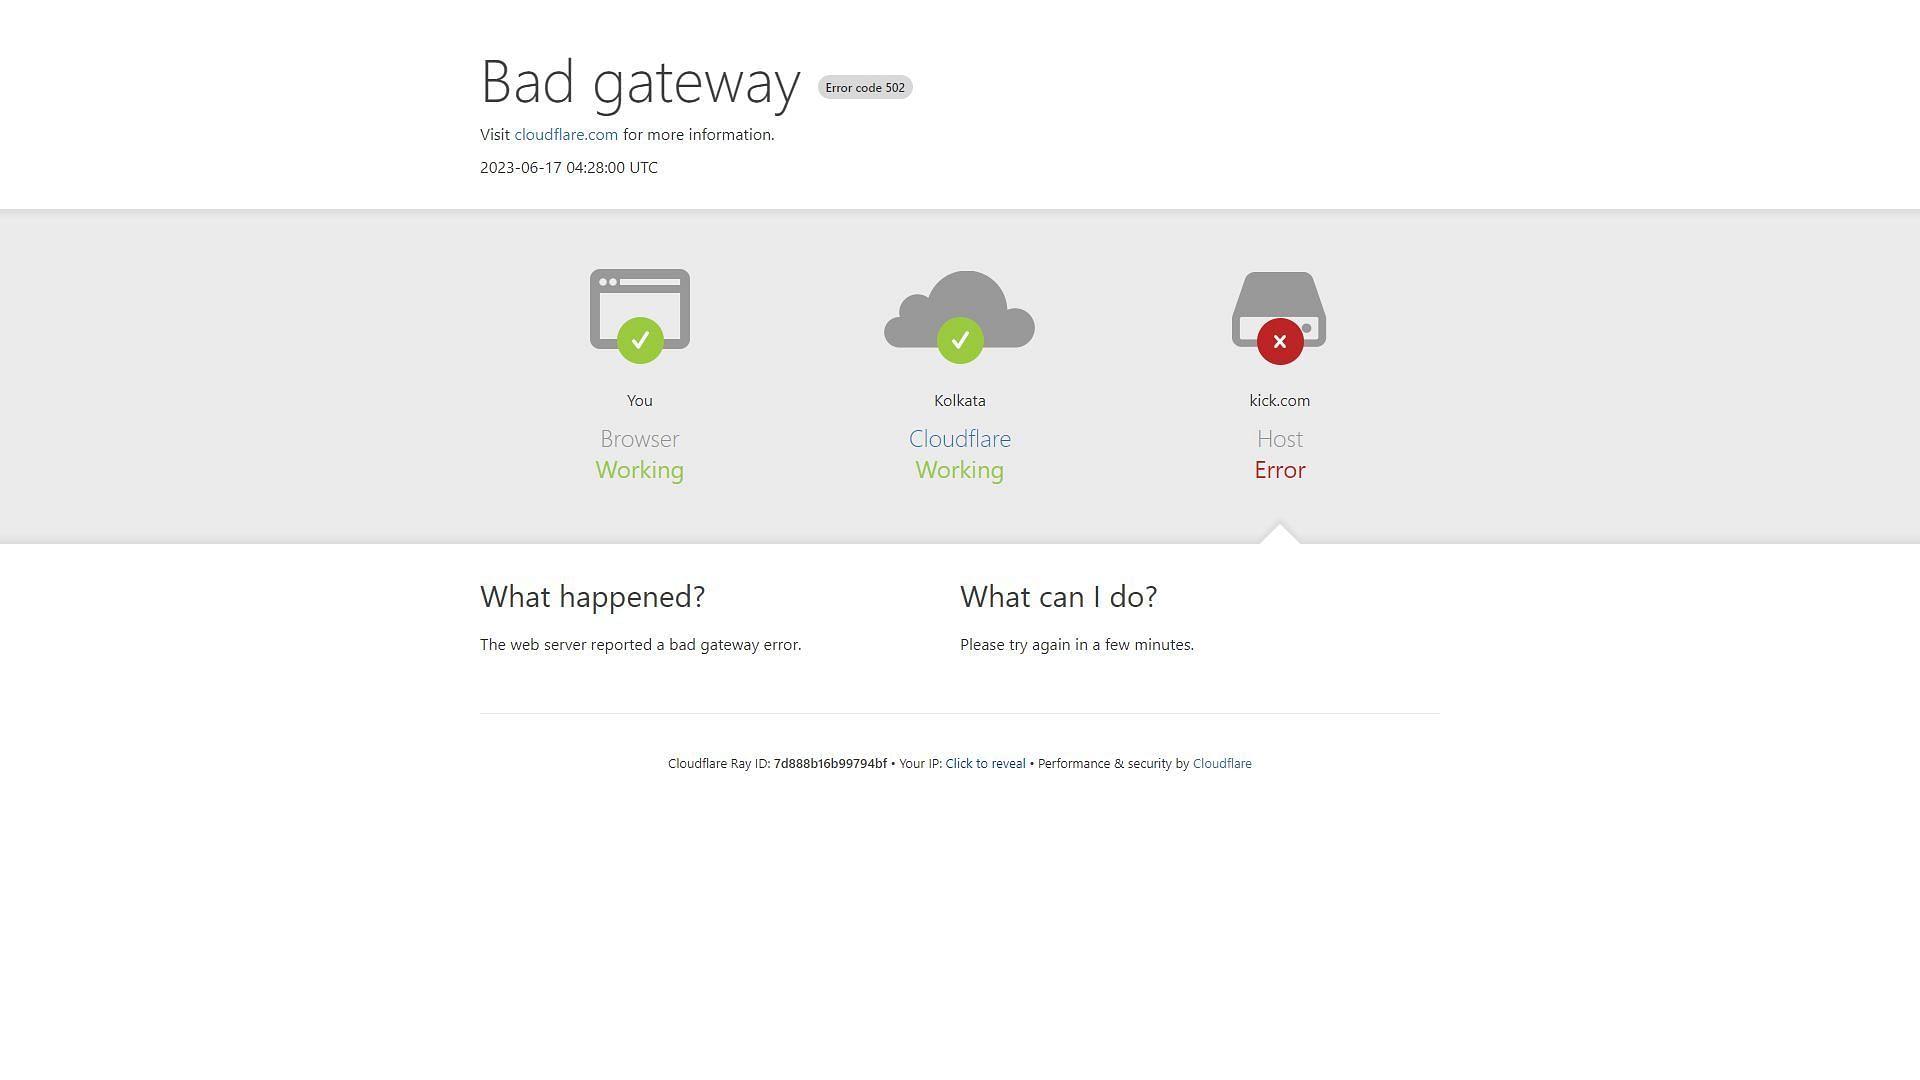 All services are down and result in a Bad Gateway error (Image via Kick)